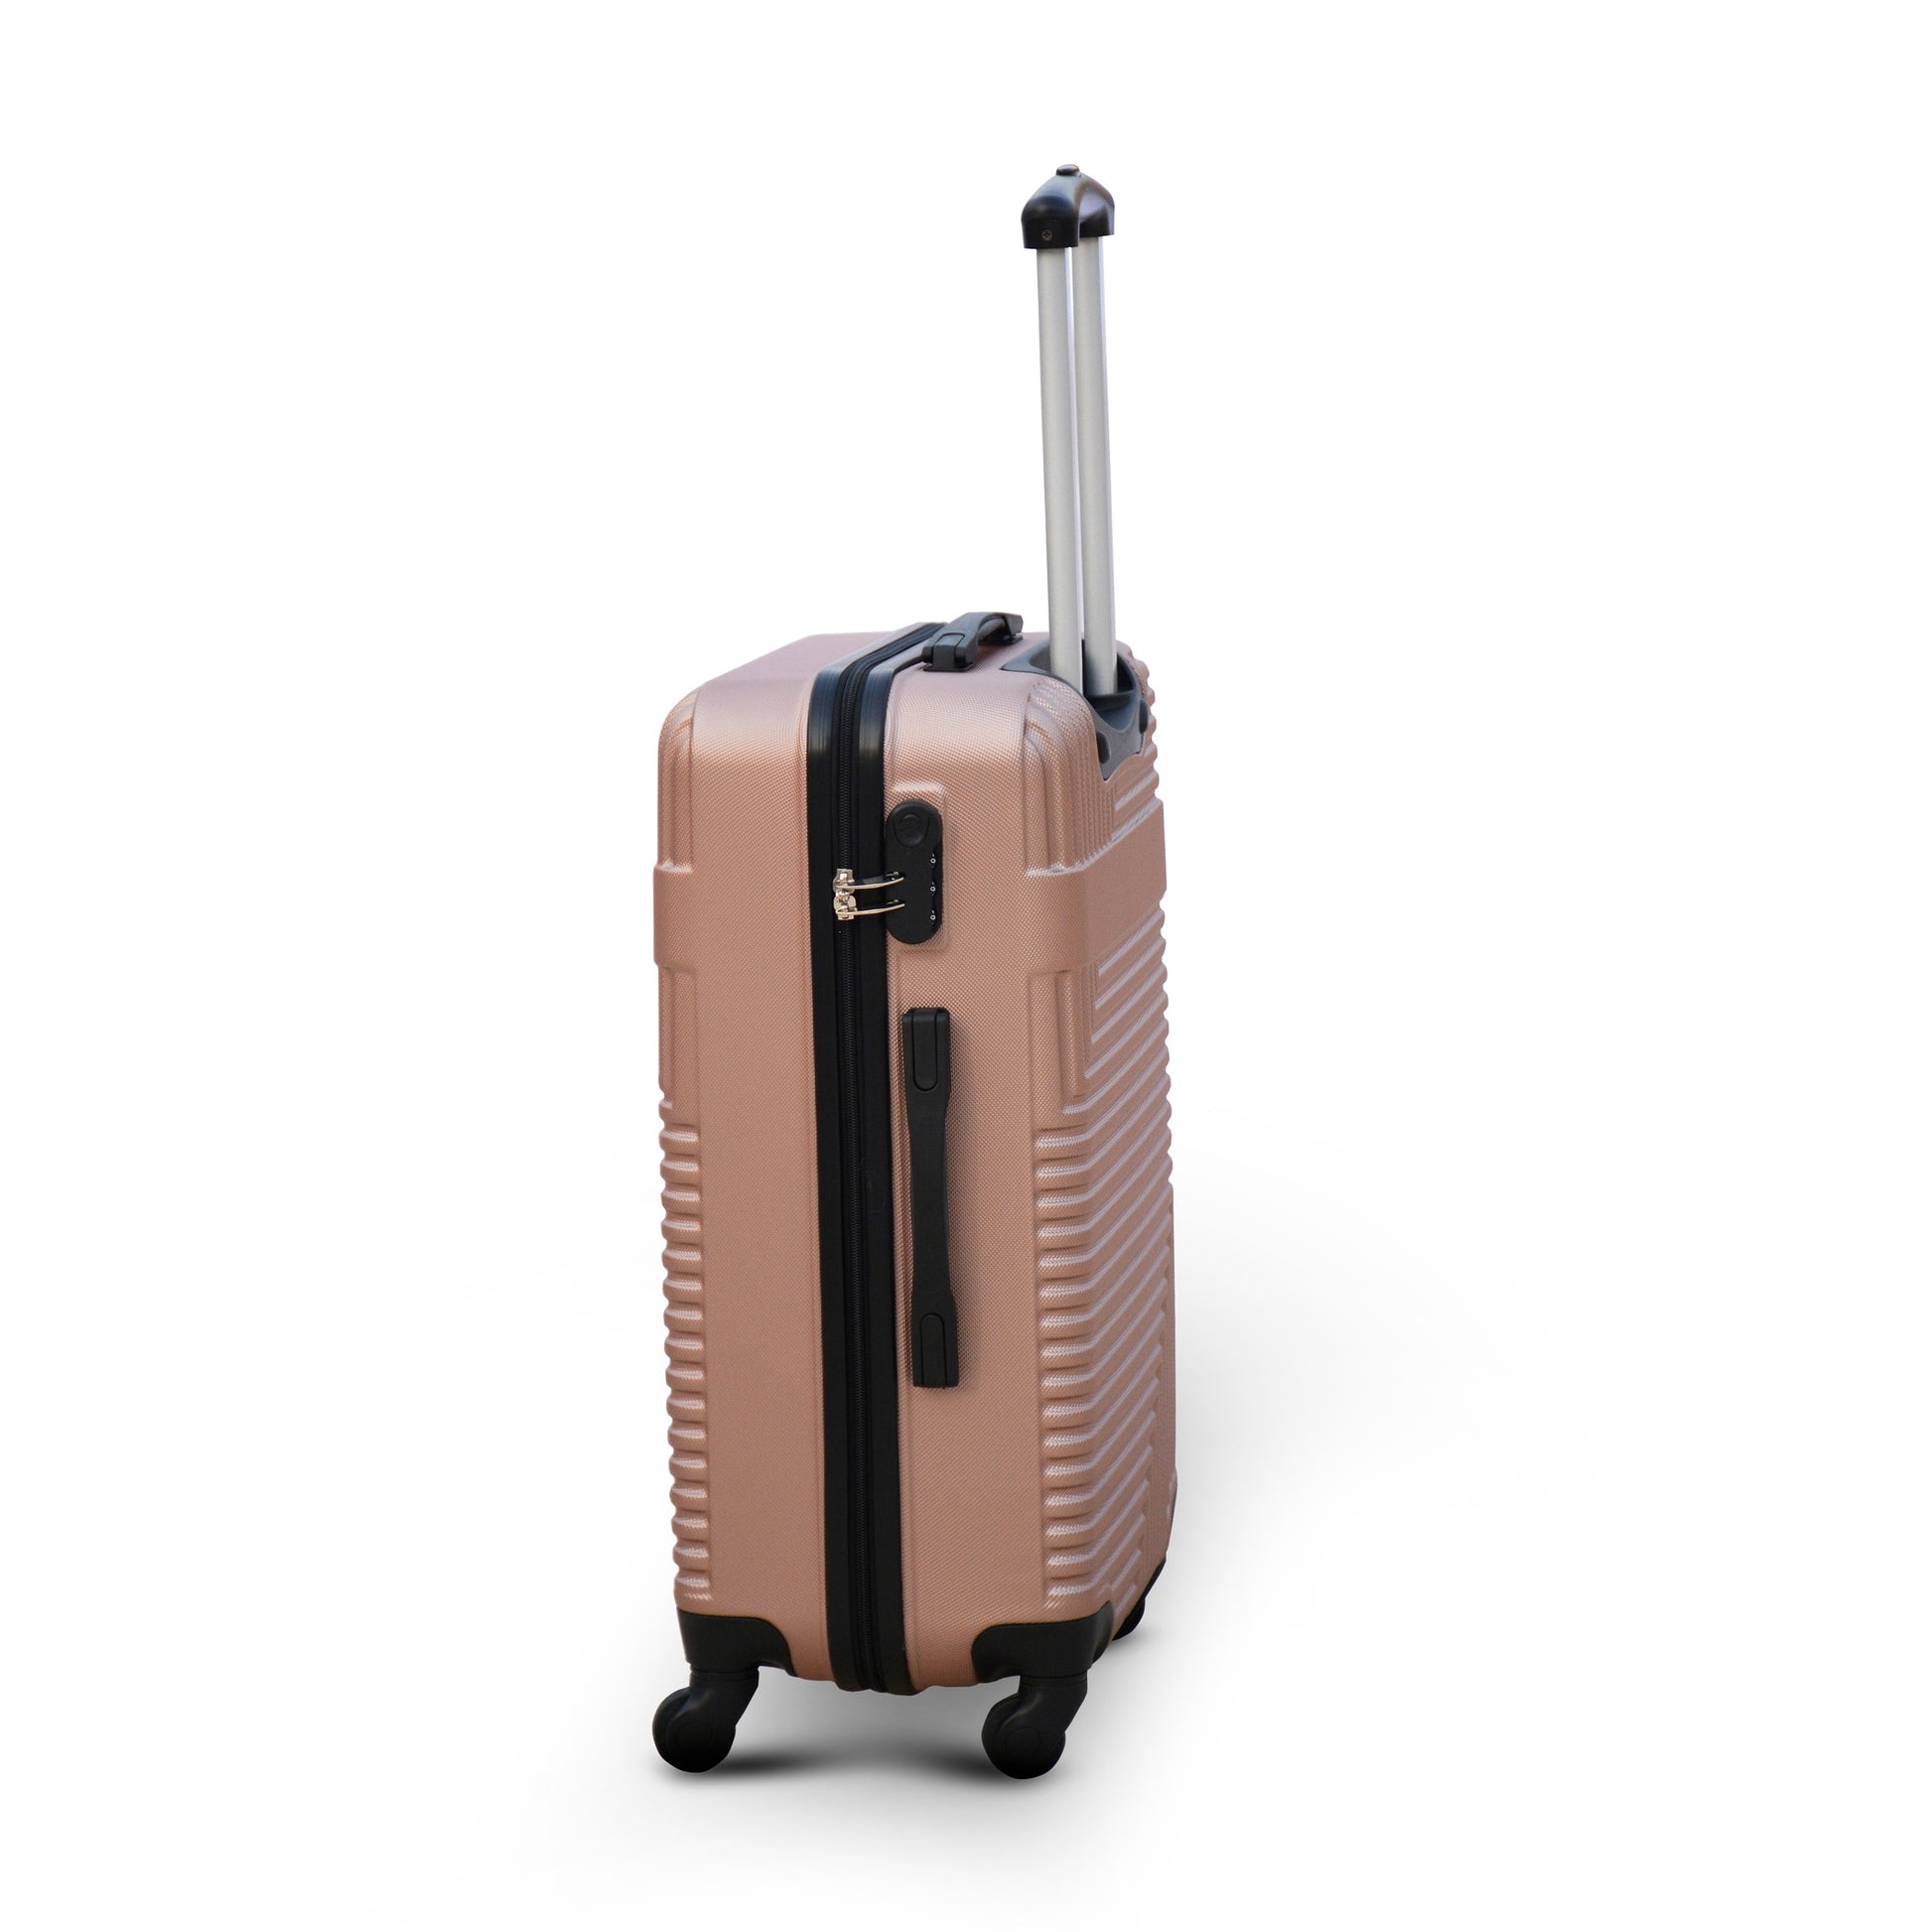 24" Rose Gold Colour Travel Way ABS Luggage Lightweight Hard Case Trolley Bag Zaappy.com